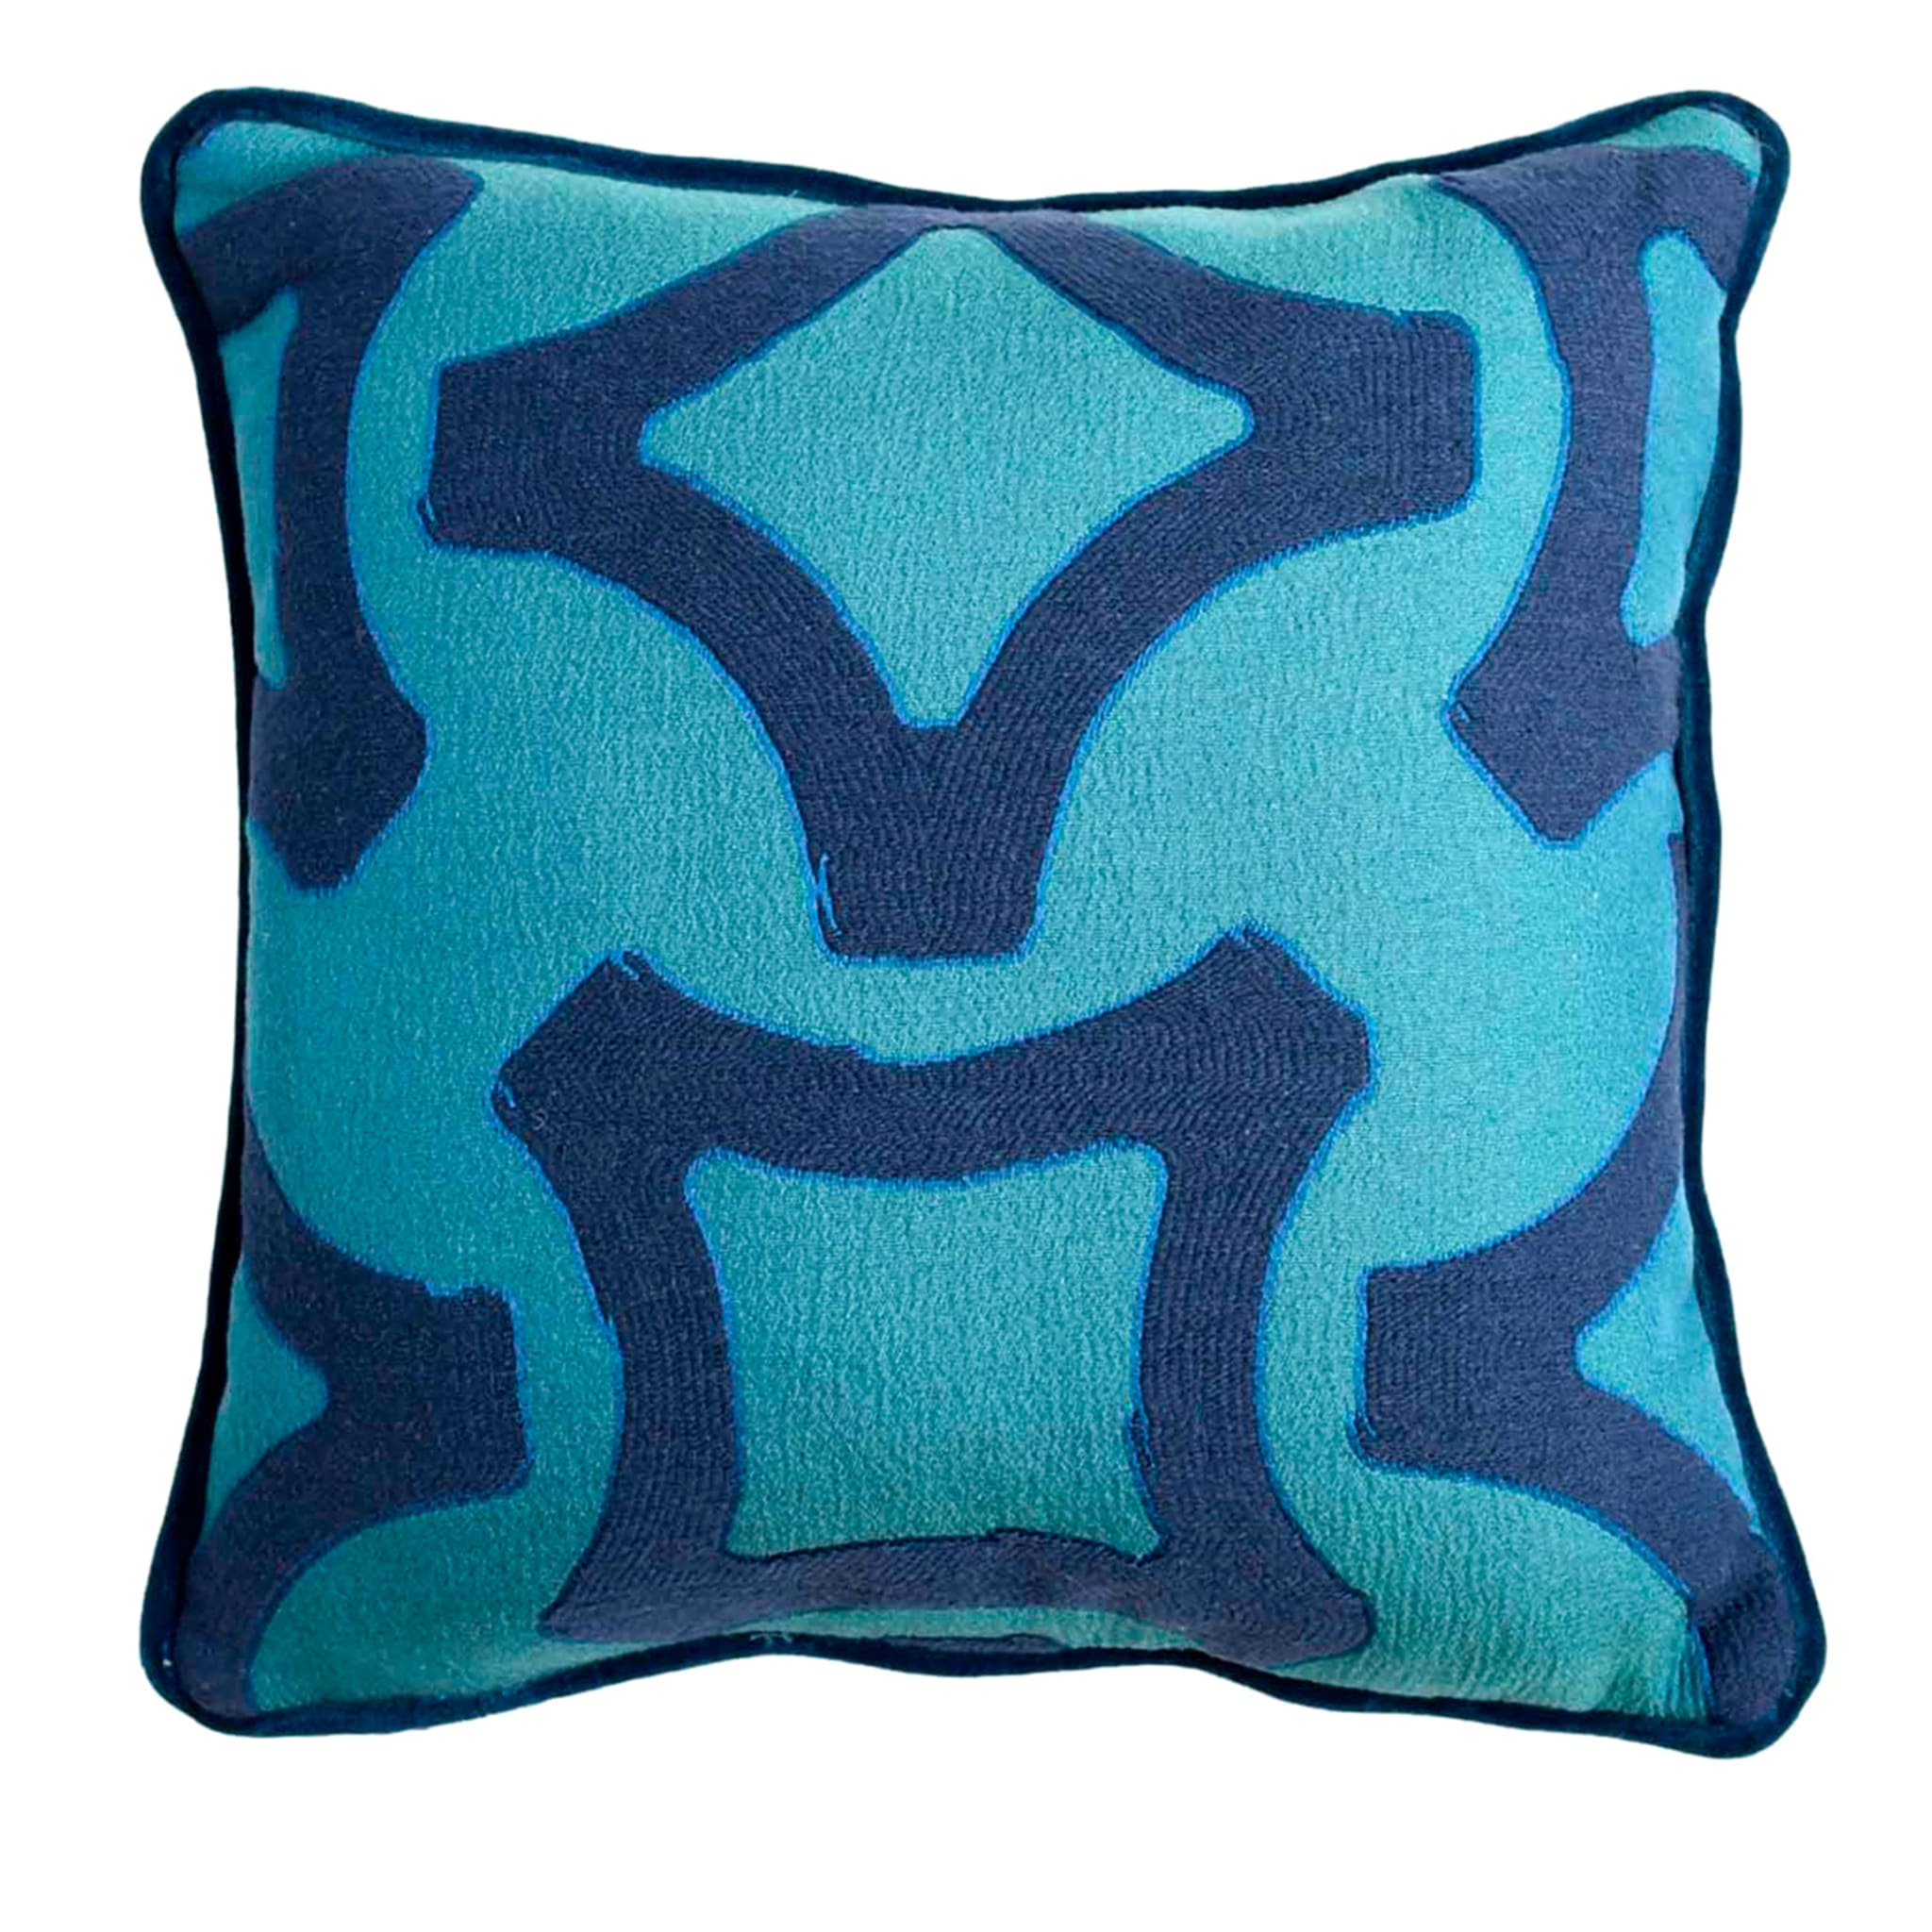 Carrè Small Patterned Turquoise and Blue Square Cushion - Main view